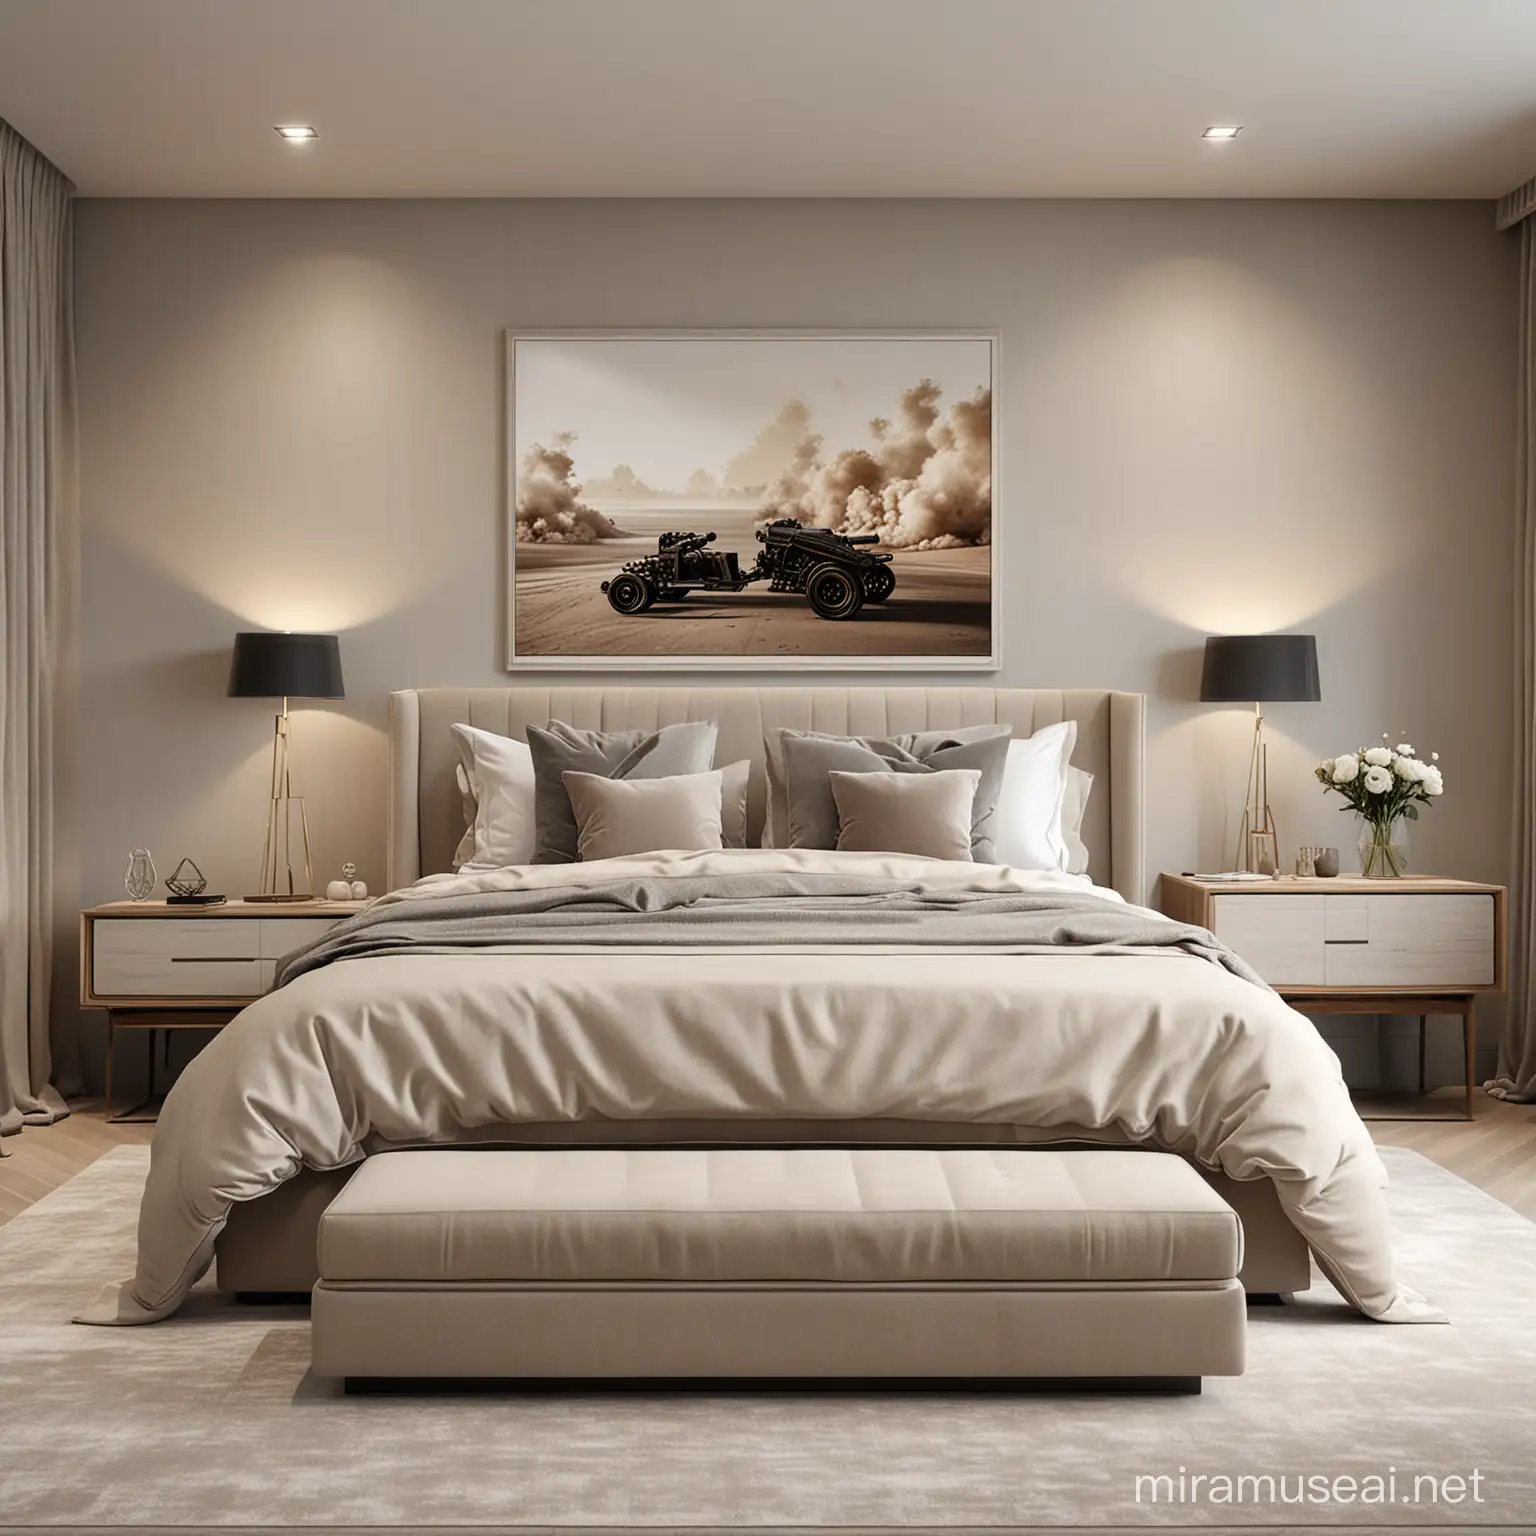 Luxurious Contemporary Bedroom Interior with Modern Artwork and Seating Area in Neutral Tones